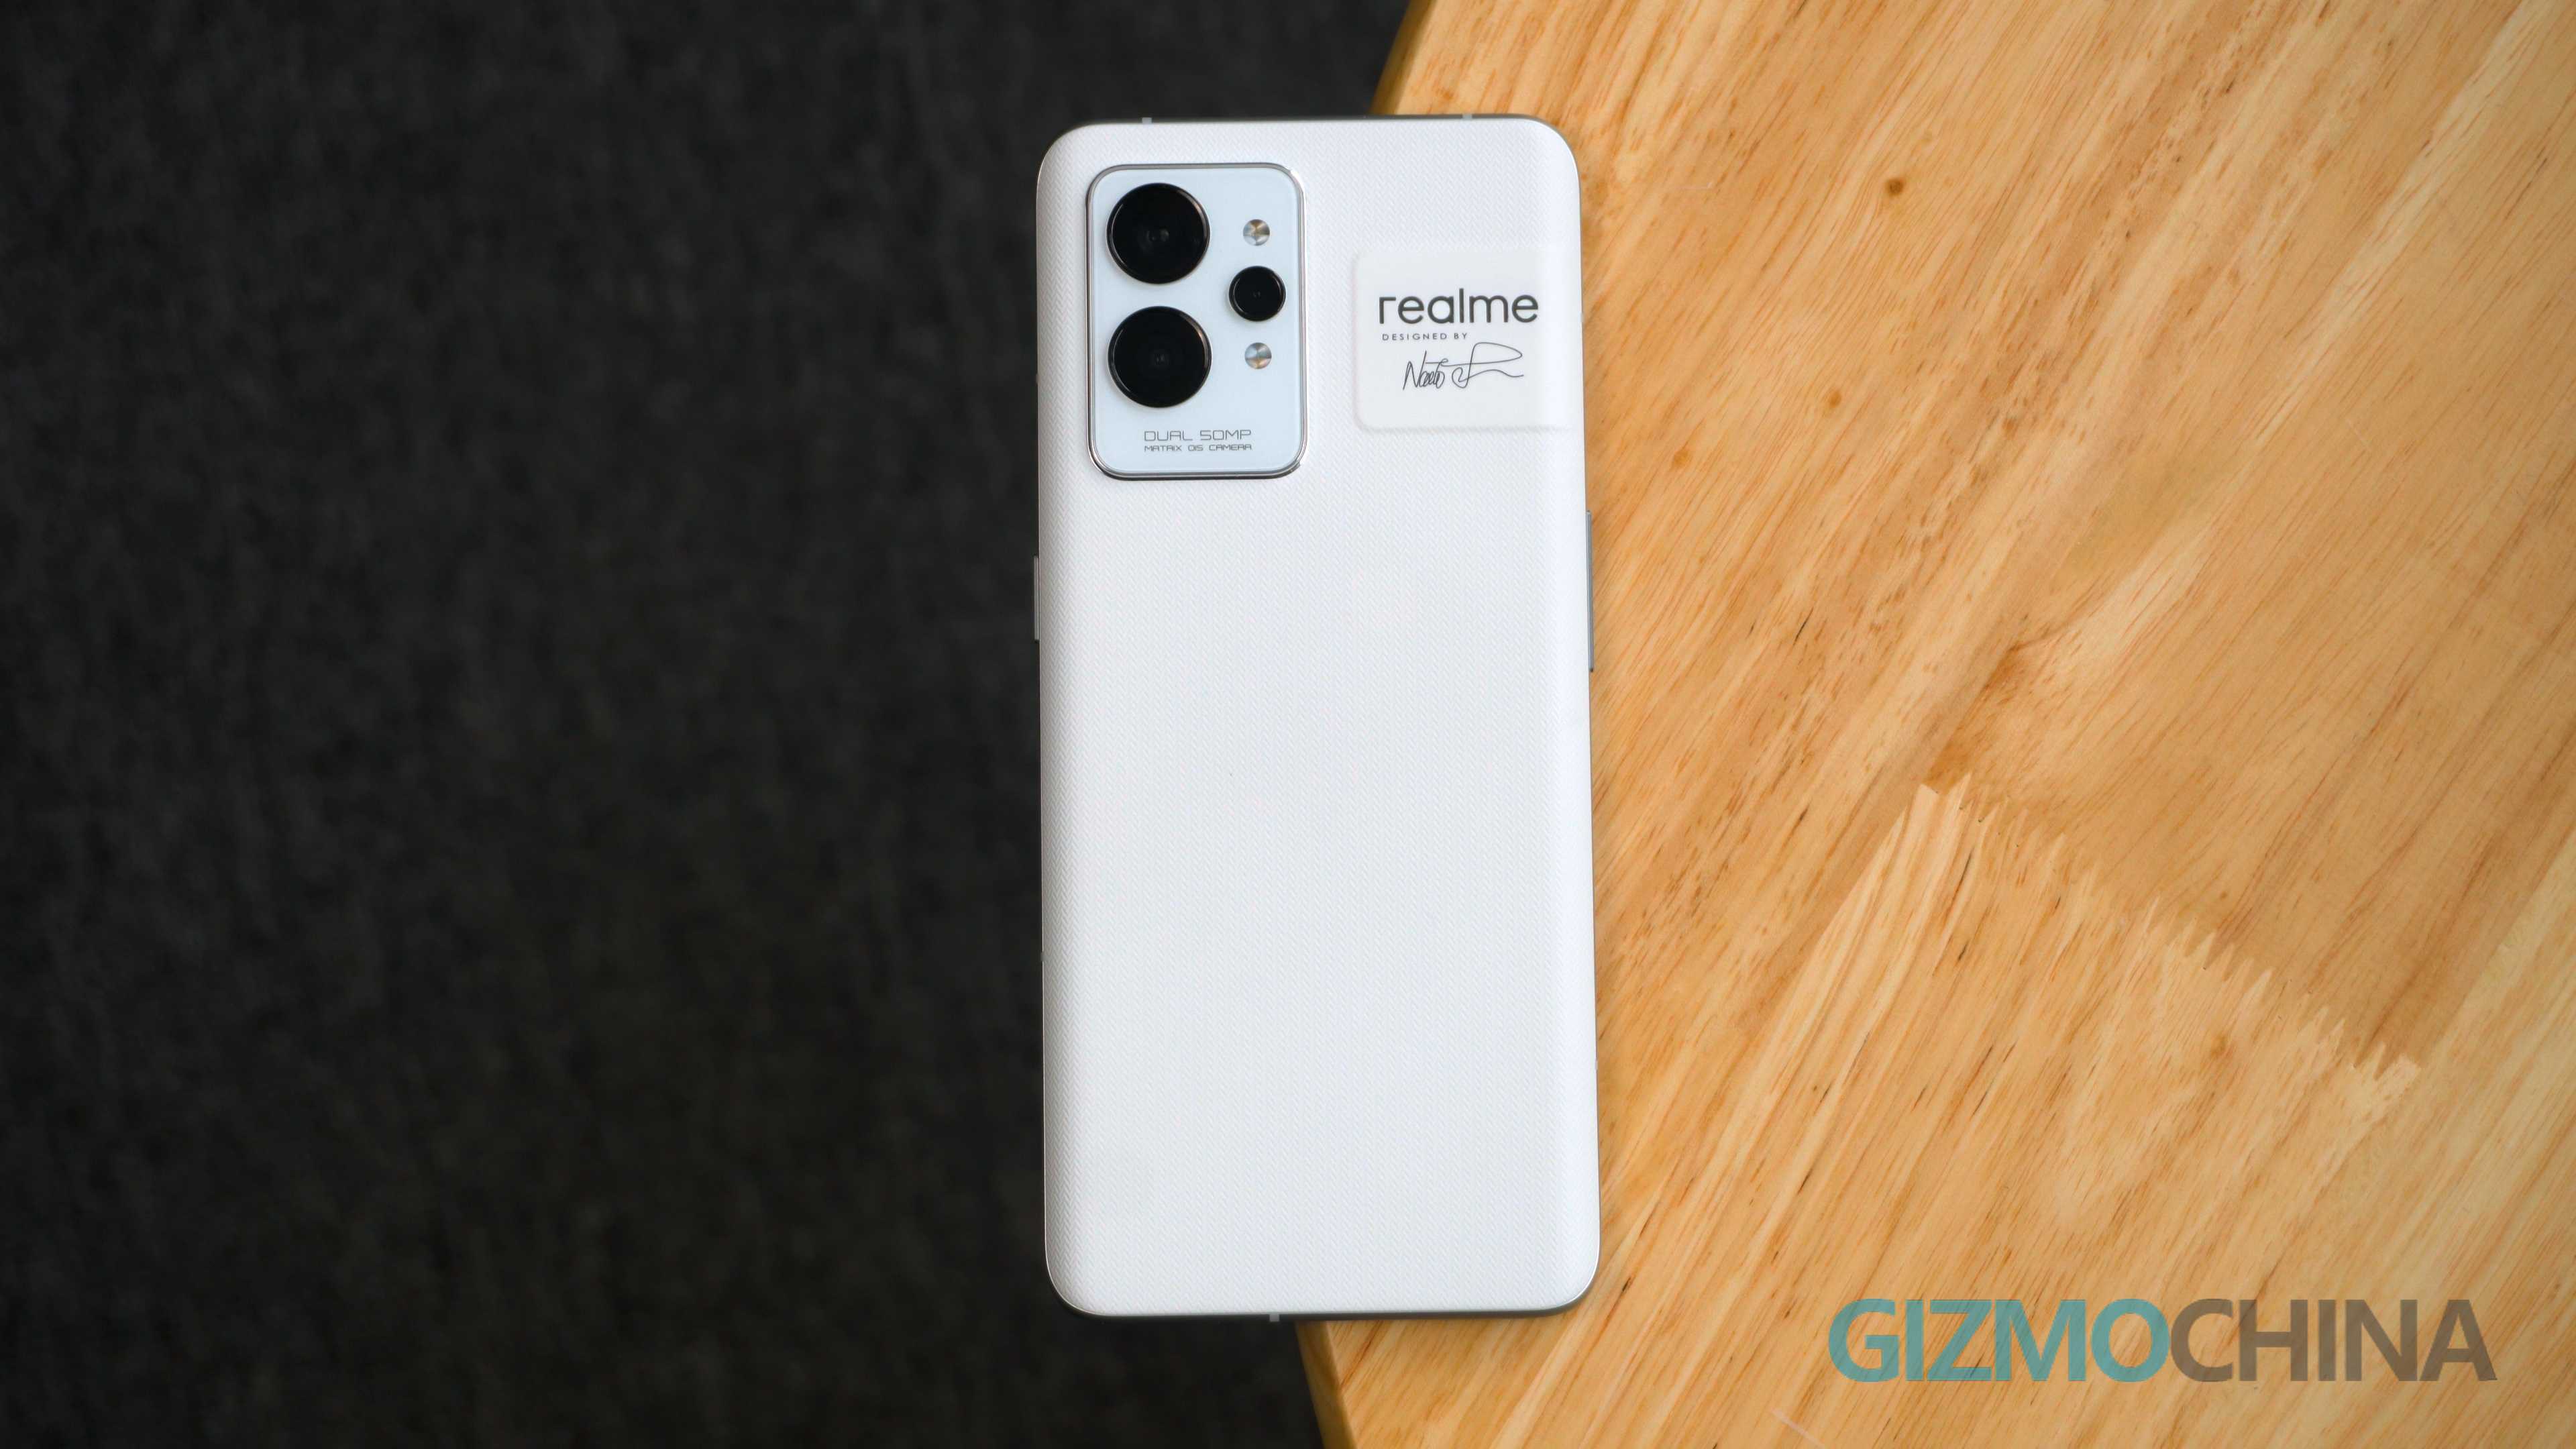 Realme GT2 Series Cooling System Unveiled